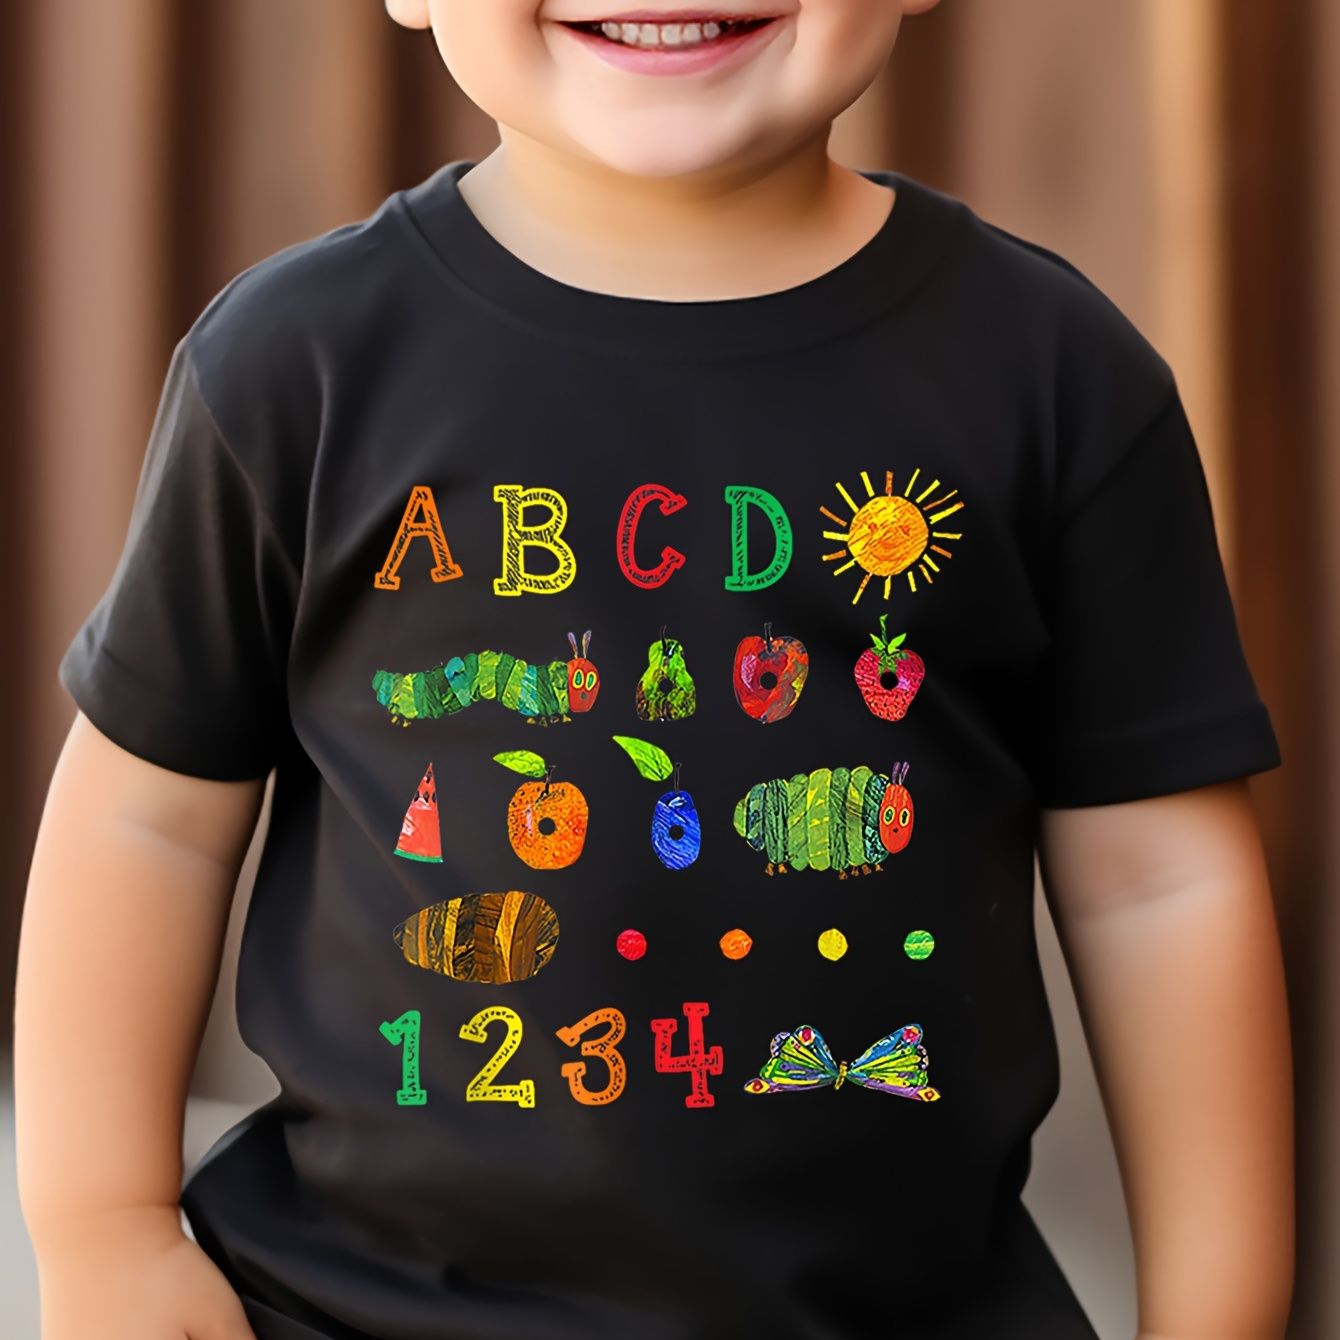 

Casual Trendy Boys' Summer Top - Letters & Numbers & Print Caterpillar Graphic Short Sleeve Crew Neck T-shirt - Trendy Tee Tops Gift